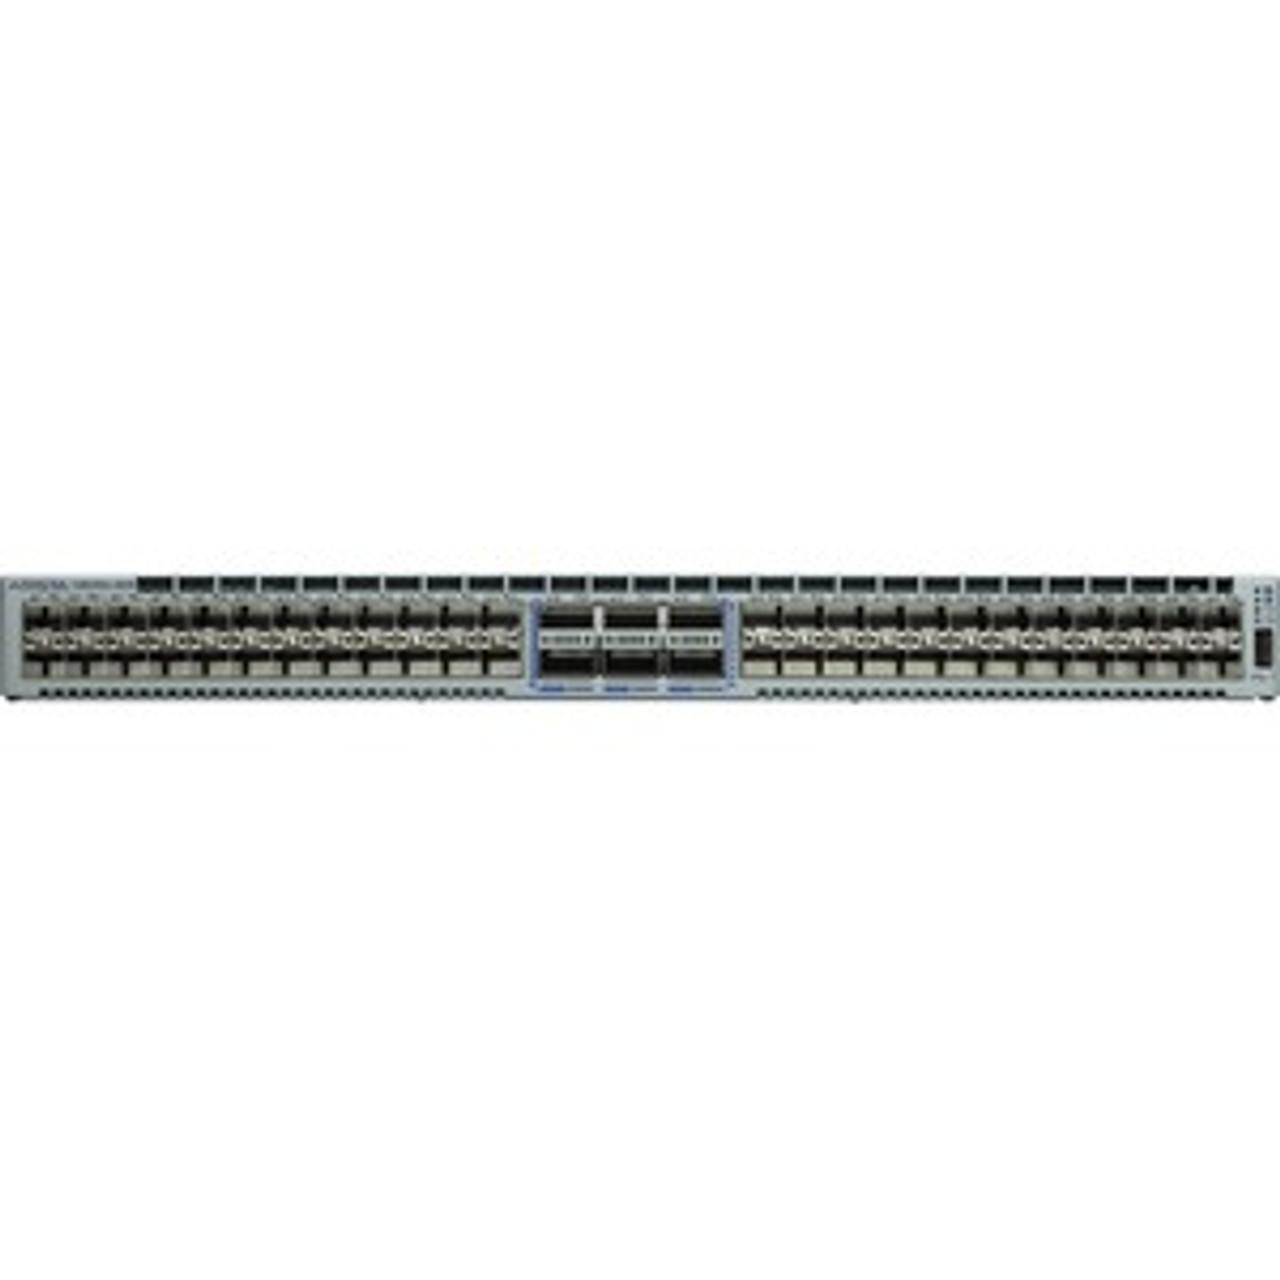 DCS-7280SR2A-48YC6-R Arista Networks 7280SR2A-48YC6 Layer 3 Switch - Manageable - 3 Layer Supported - Modular - Optical Fiber - 1U High - Rack-mountable, Rail-mountable